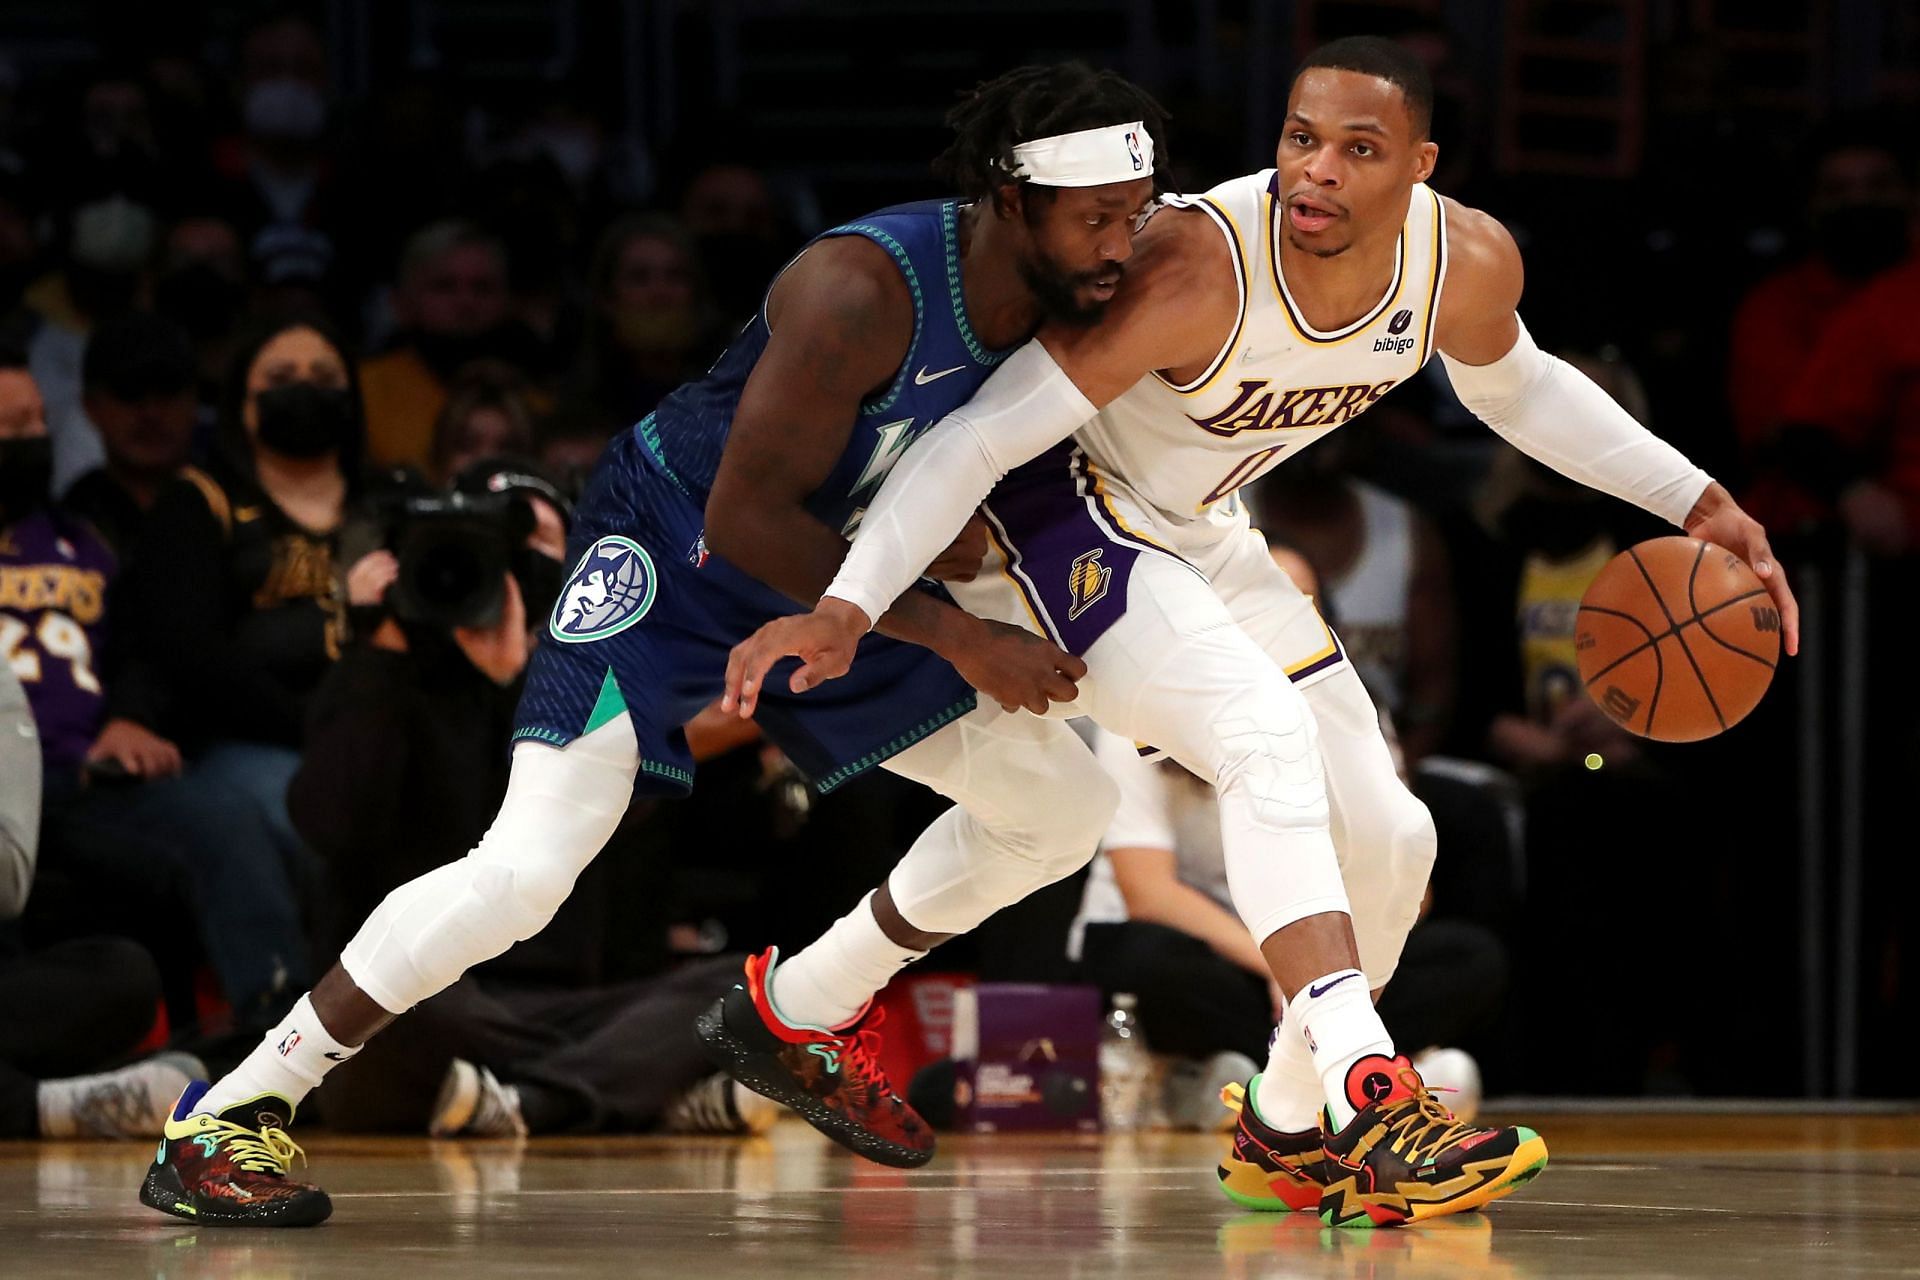 Los Angeles Lakers veteran Russell Westbrook and newly acquired teammate Patrick Beverley